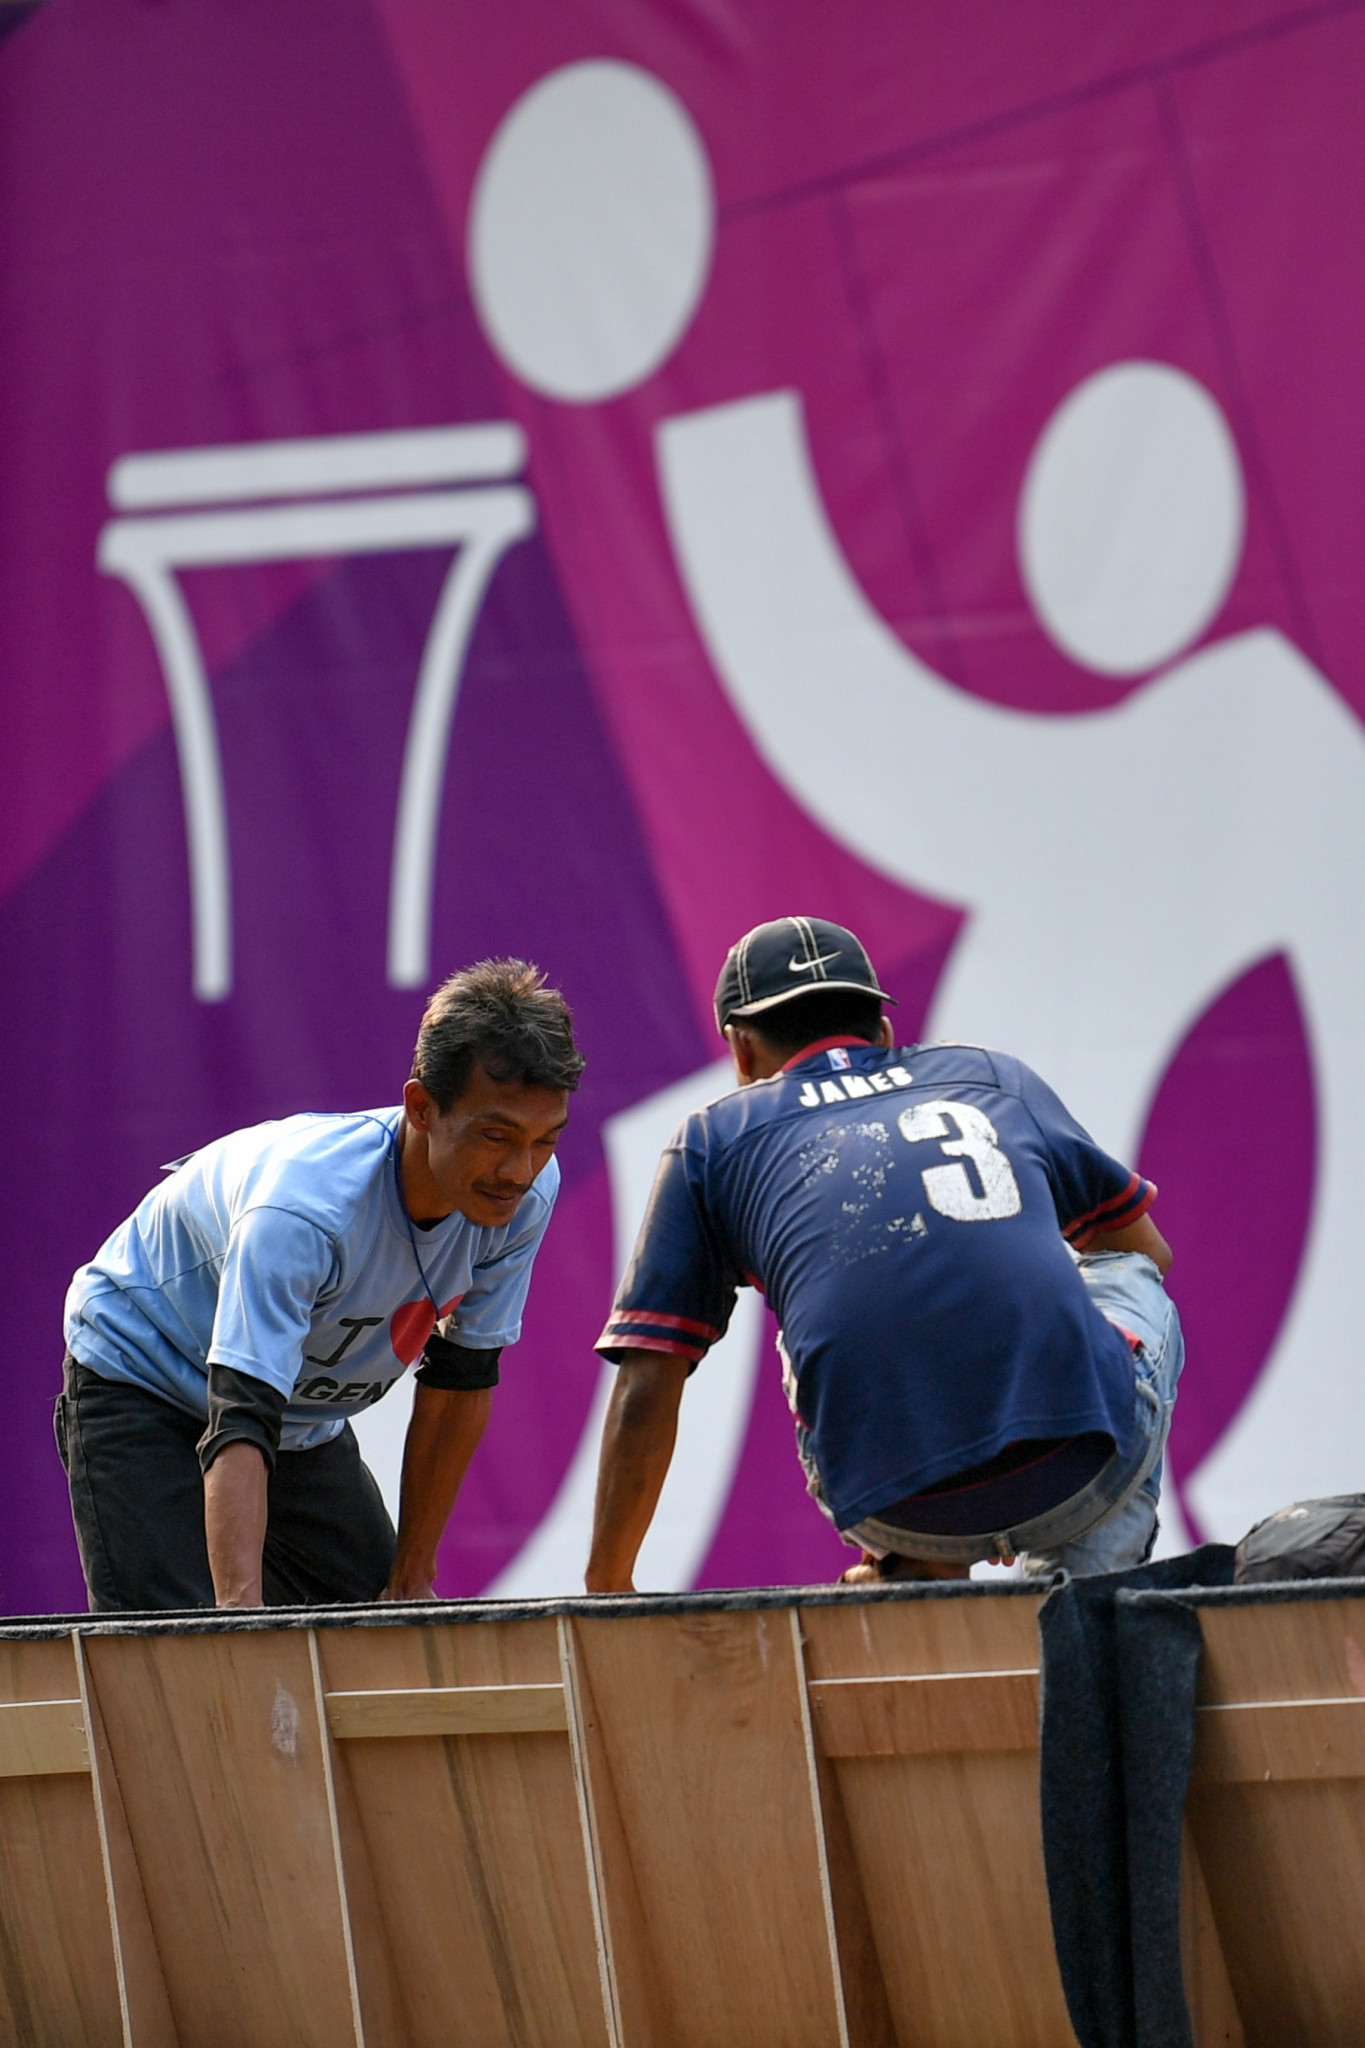 Preparations continued at the GBK Basket Hall ©Getty Images